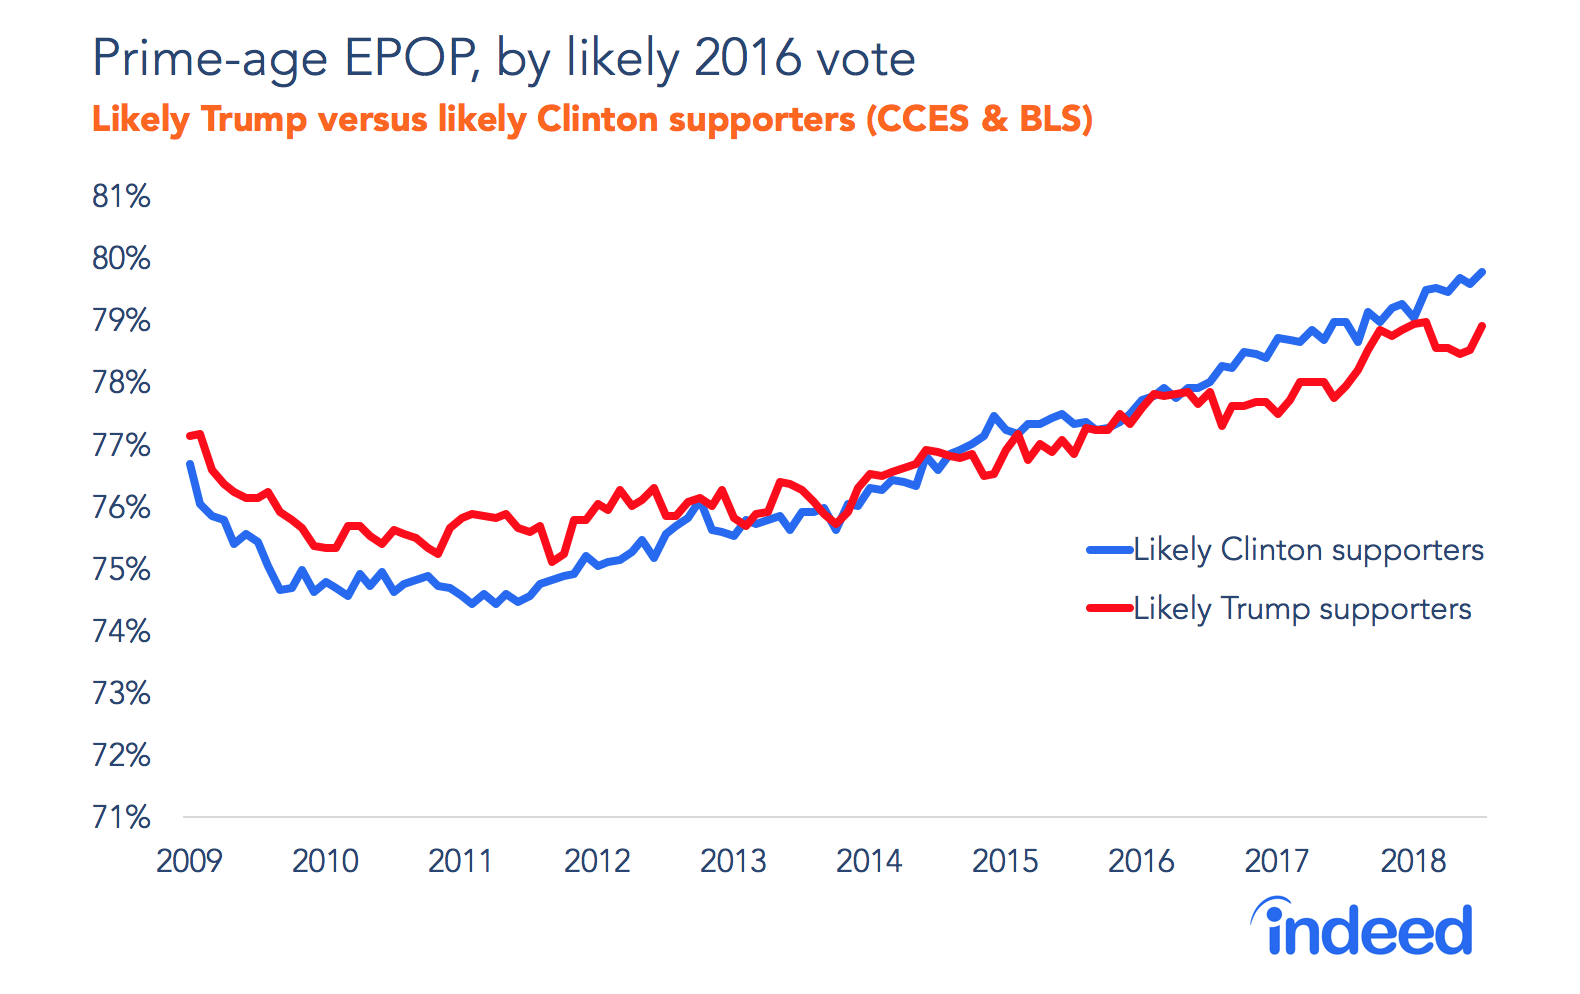 Prime-age EPOP, by likely 2016 vote